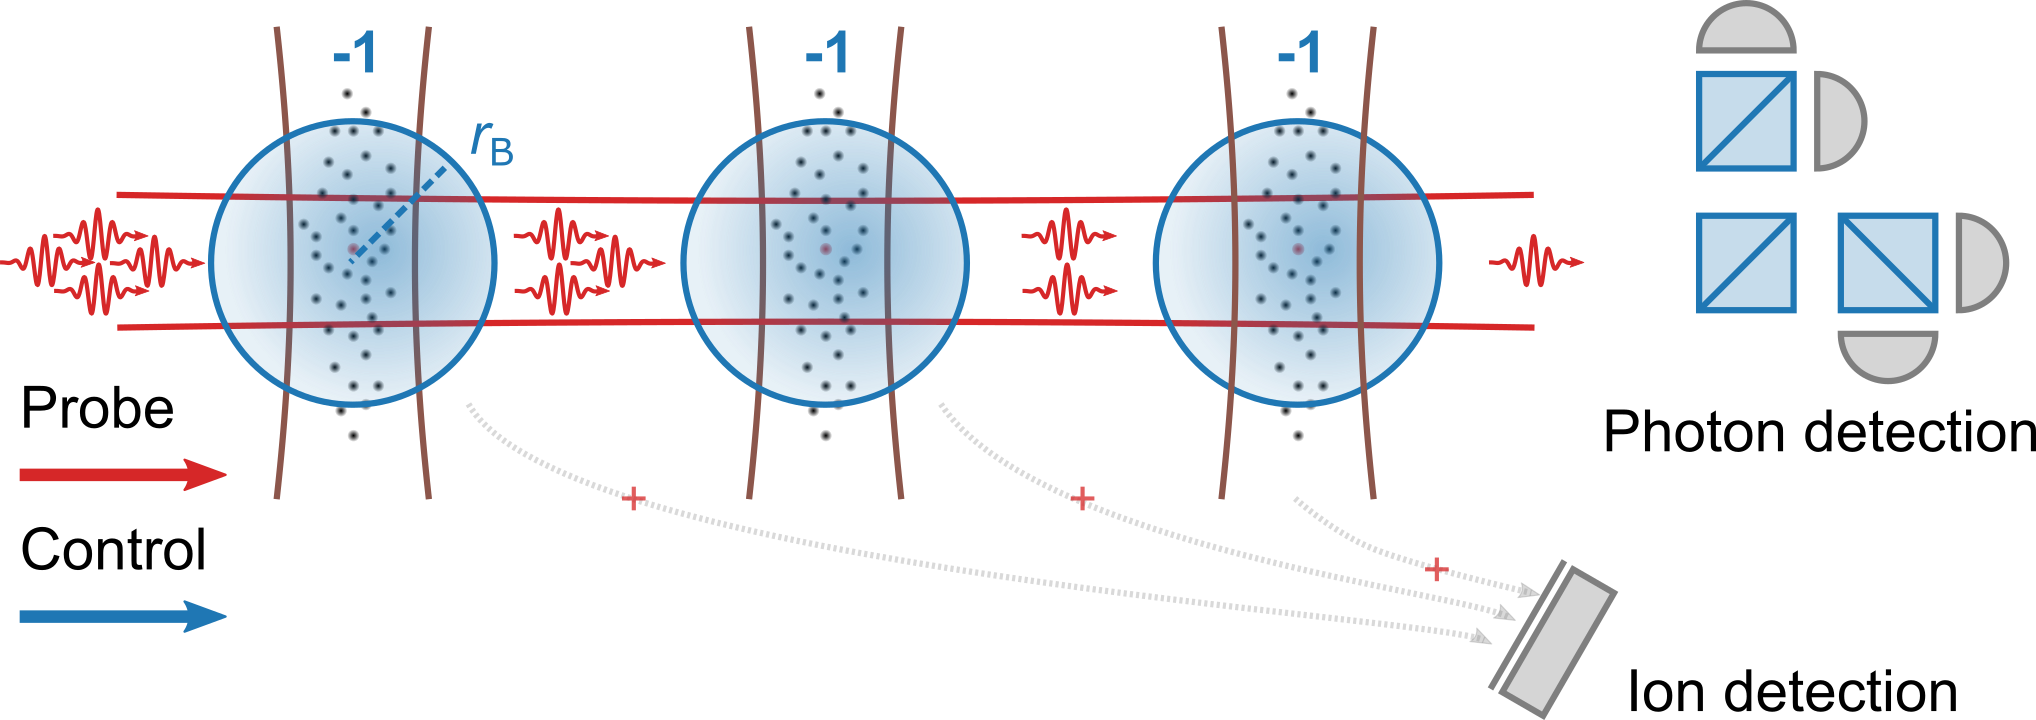 Subtraction of one-two-three photons